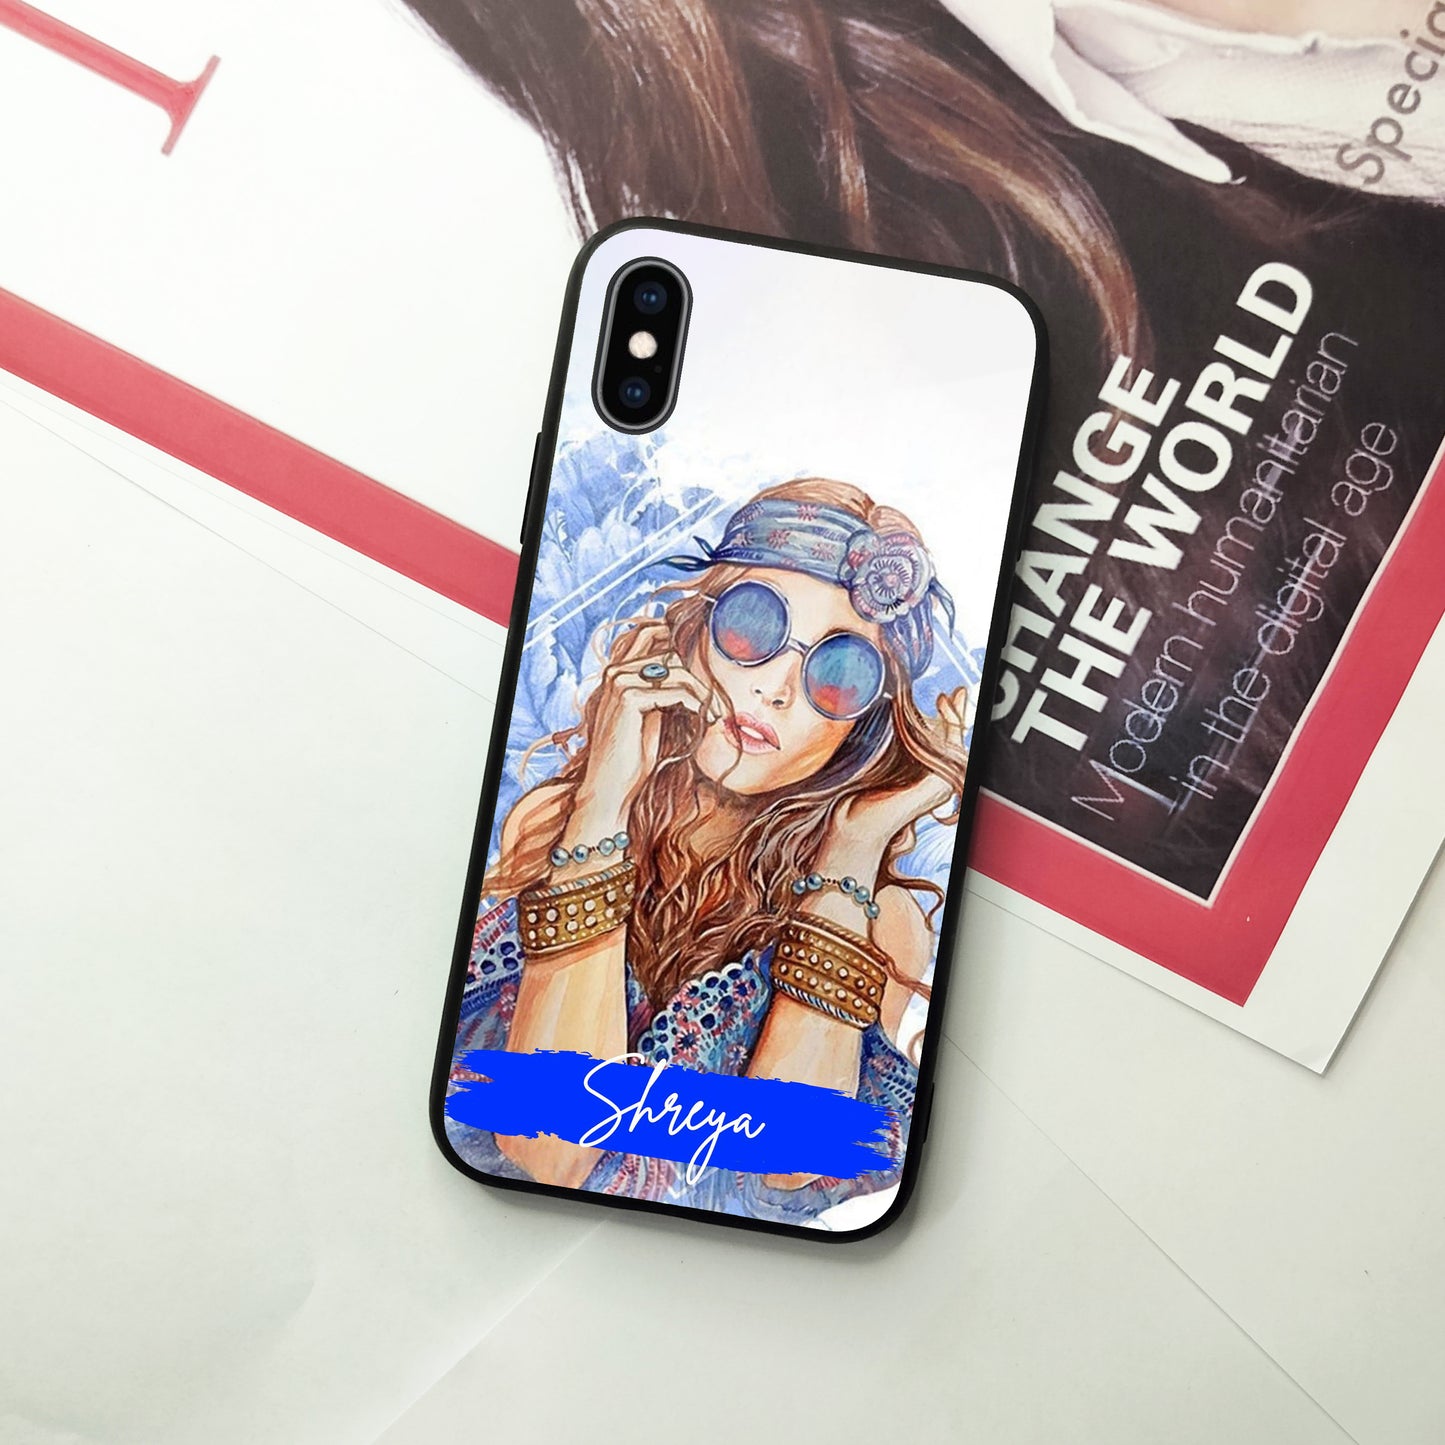 Bindass Babe Customize Glass Case Cover For iPhone